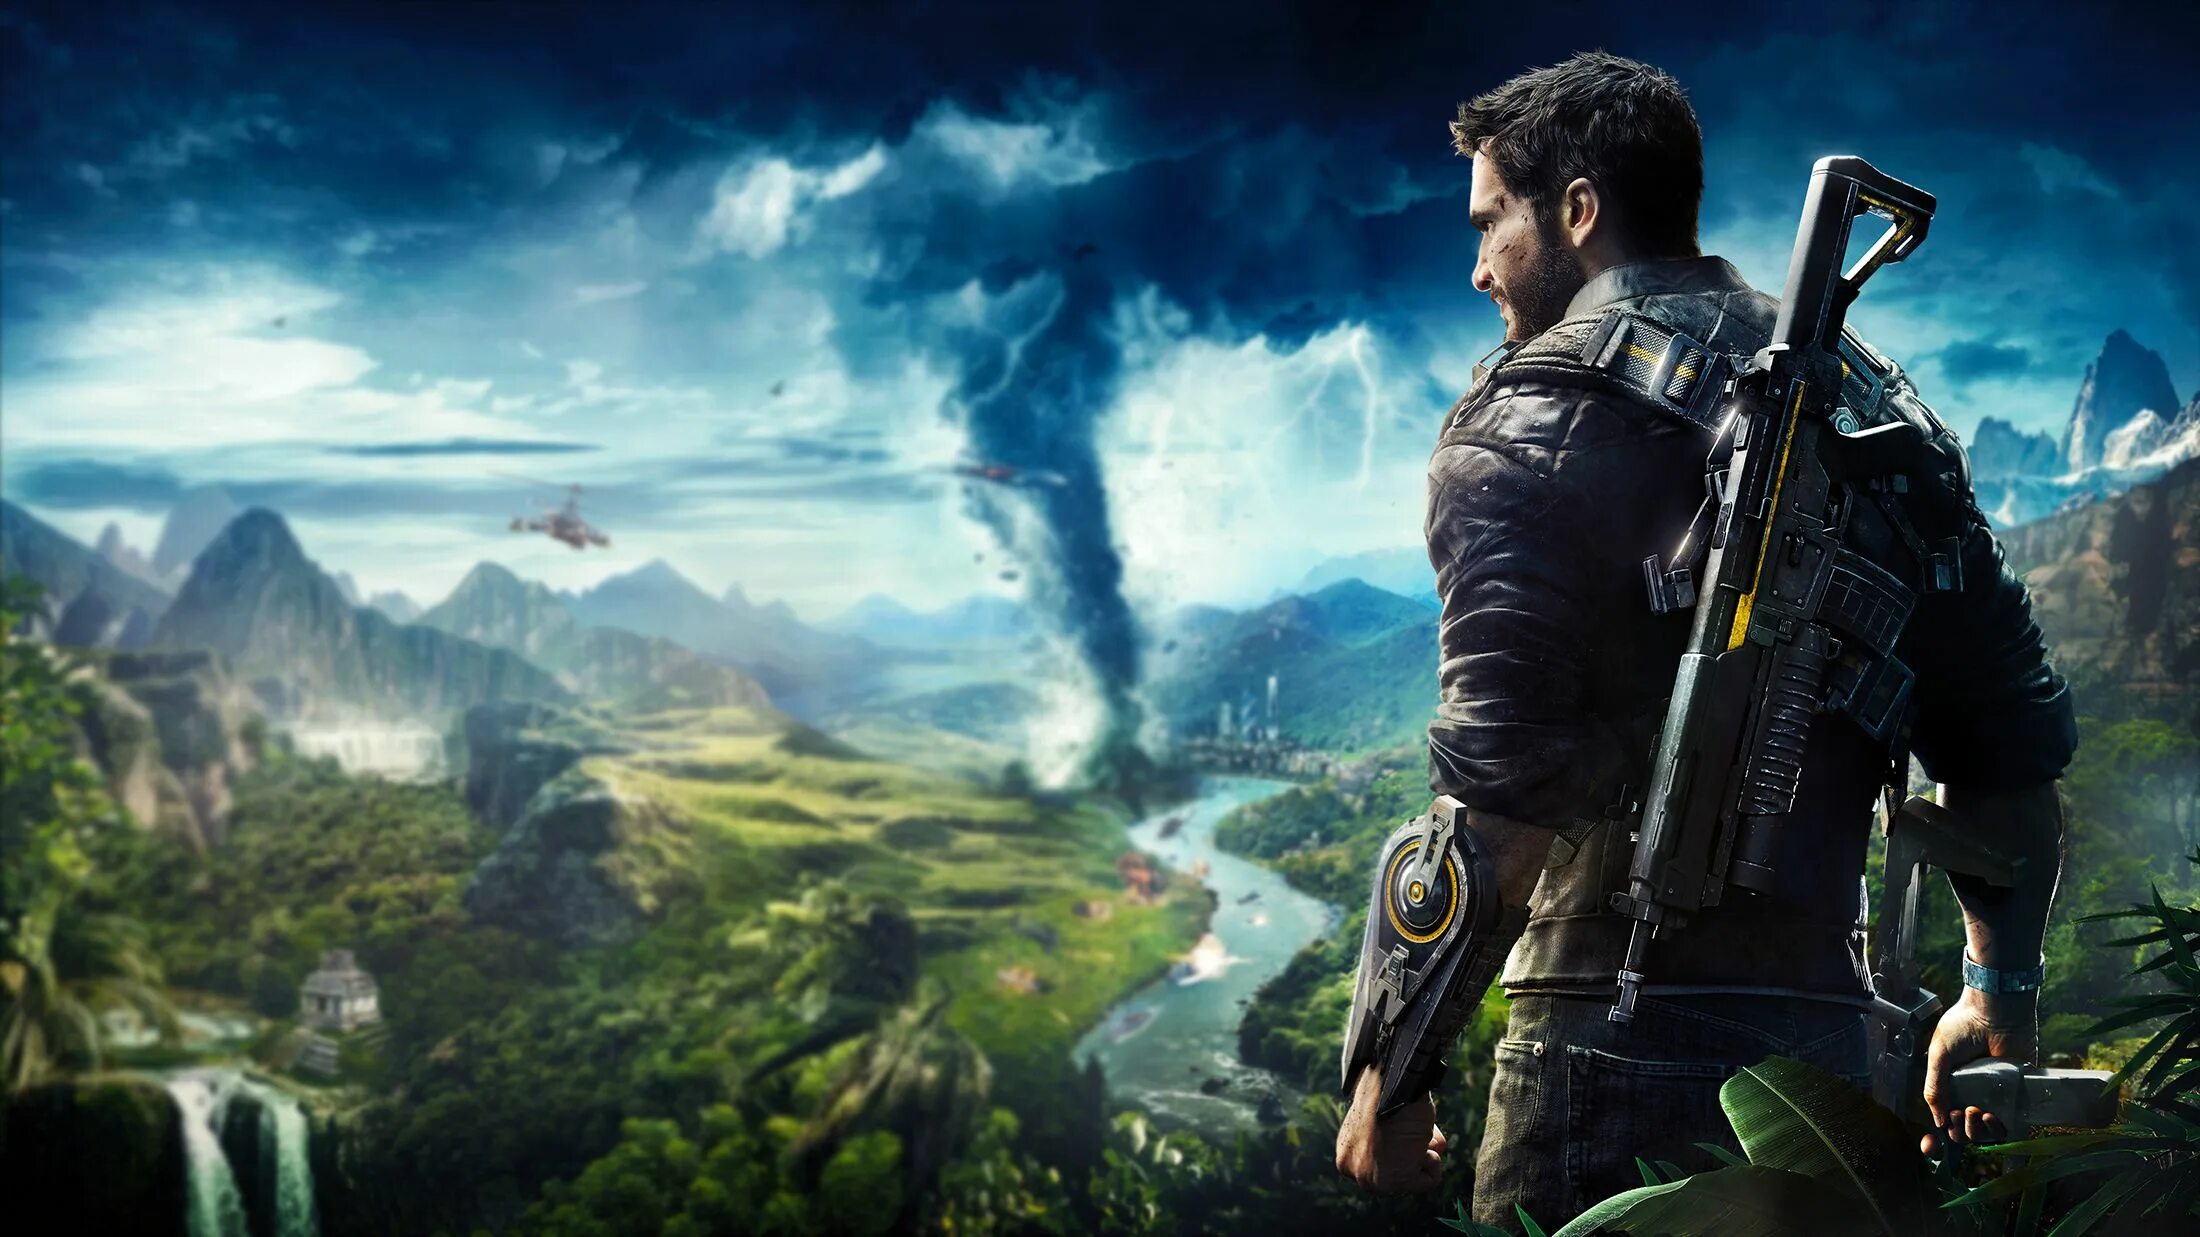 Мир 4 картинки. Just cause 4 Xbox 360. Just cause 4 Avalanche Studios Group. Just cause 4 Rogue agent. Just cause 4 Gameplay Official.